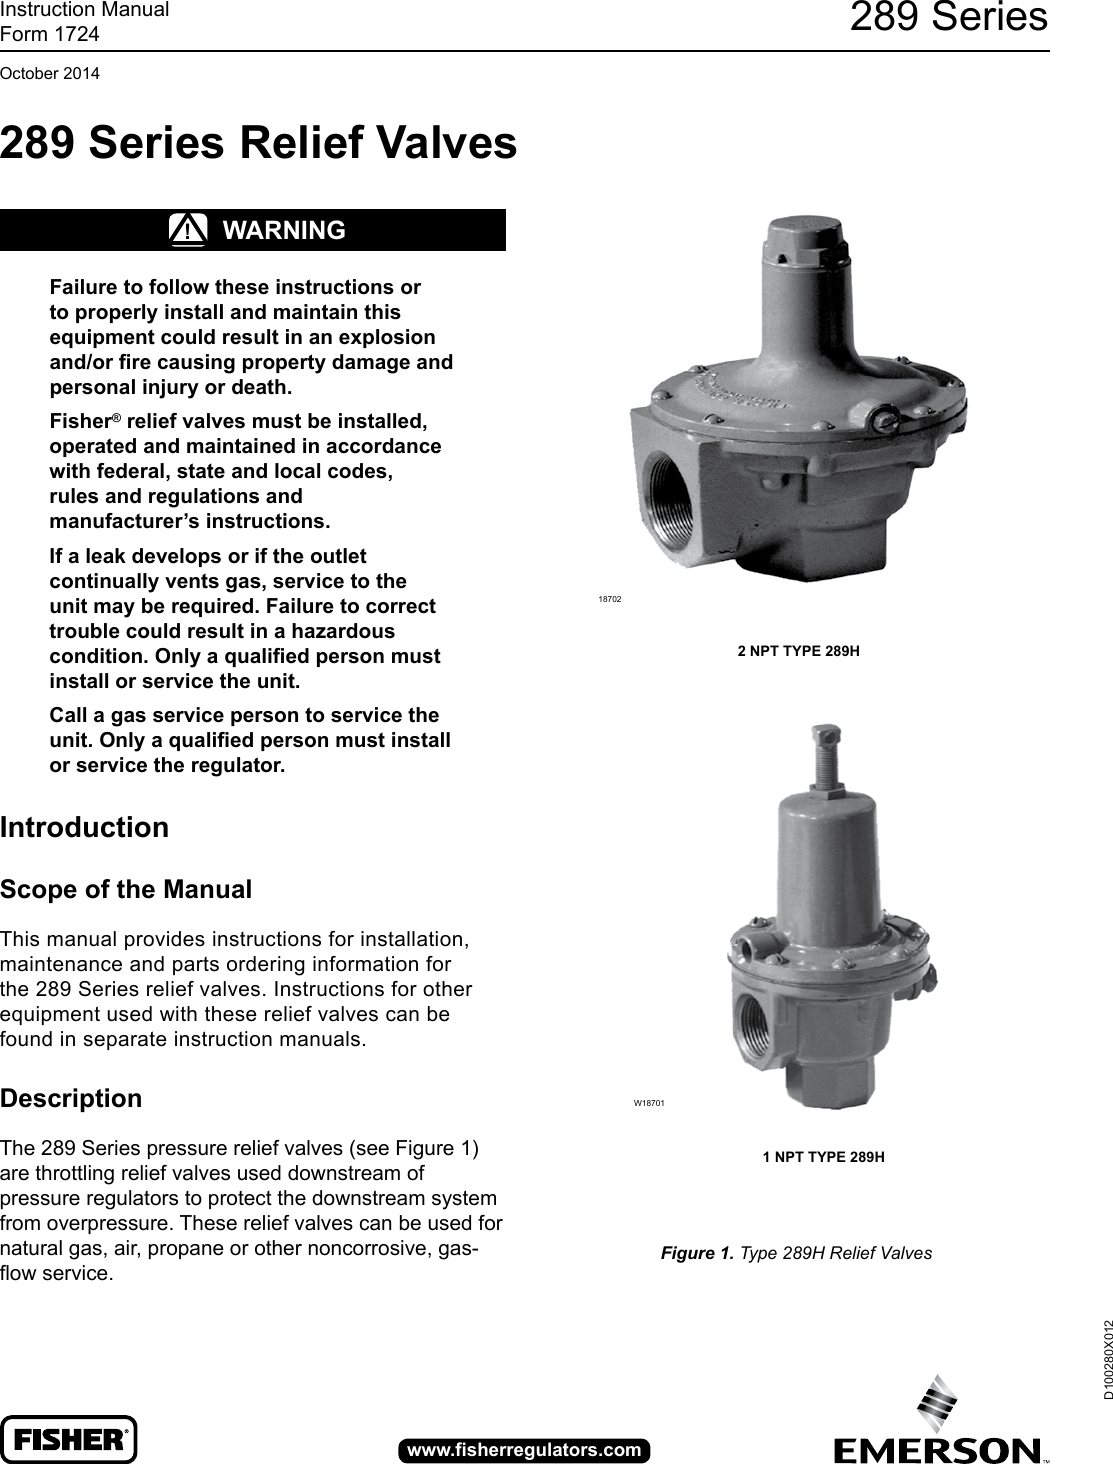 Page 1 of 12 - Emerson Emerson-289-Series-Relief-Valves-Backpressure-Regulators-Instruction-Manual-  Emerson-289-series-relief-valves-backpressure-regulators-instruction-manual